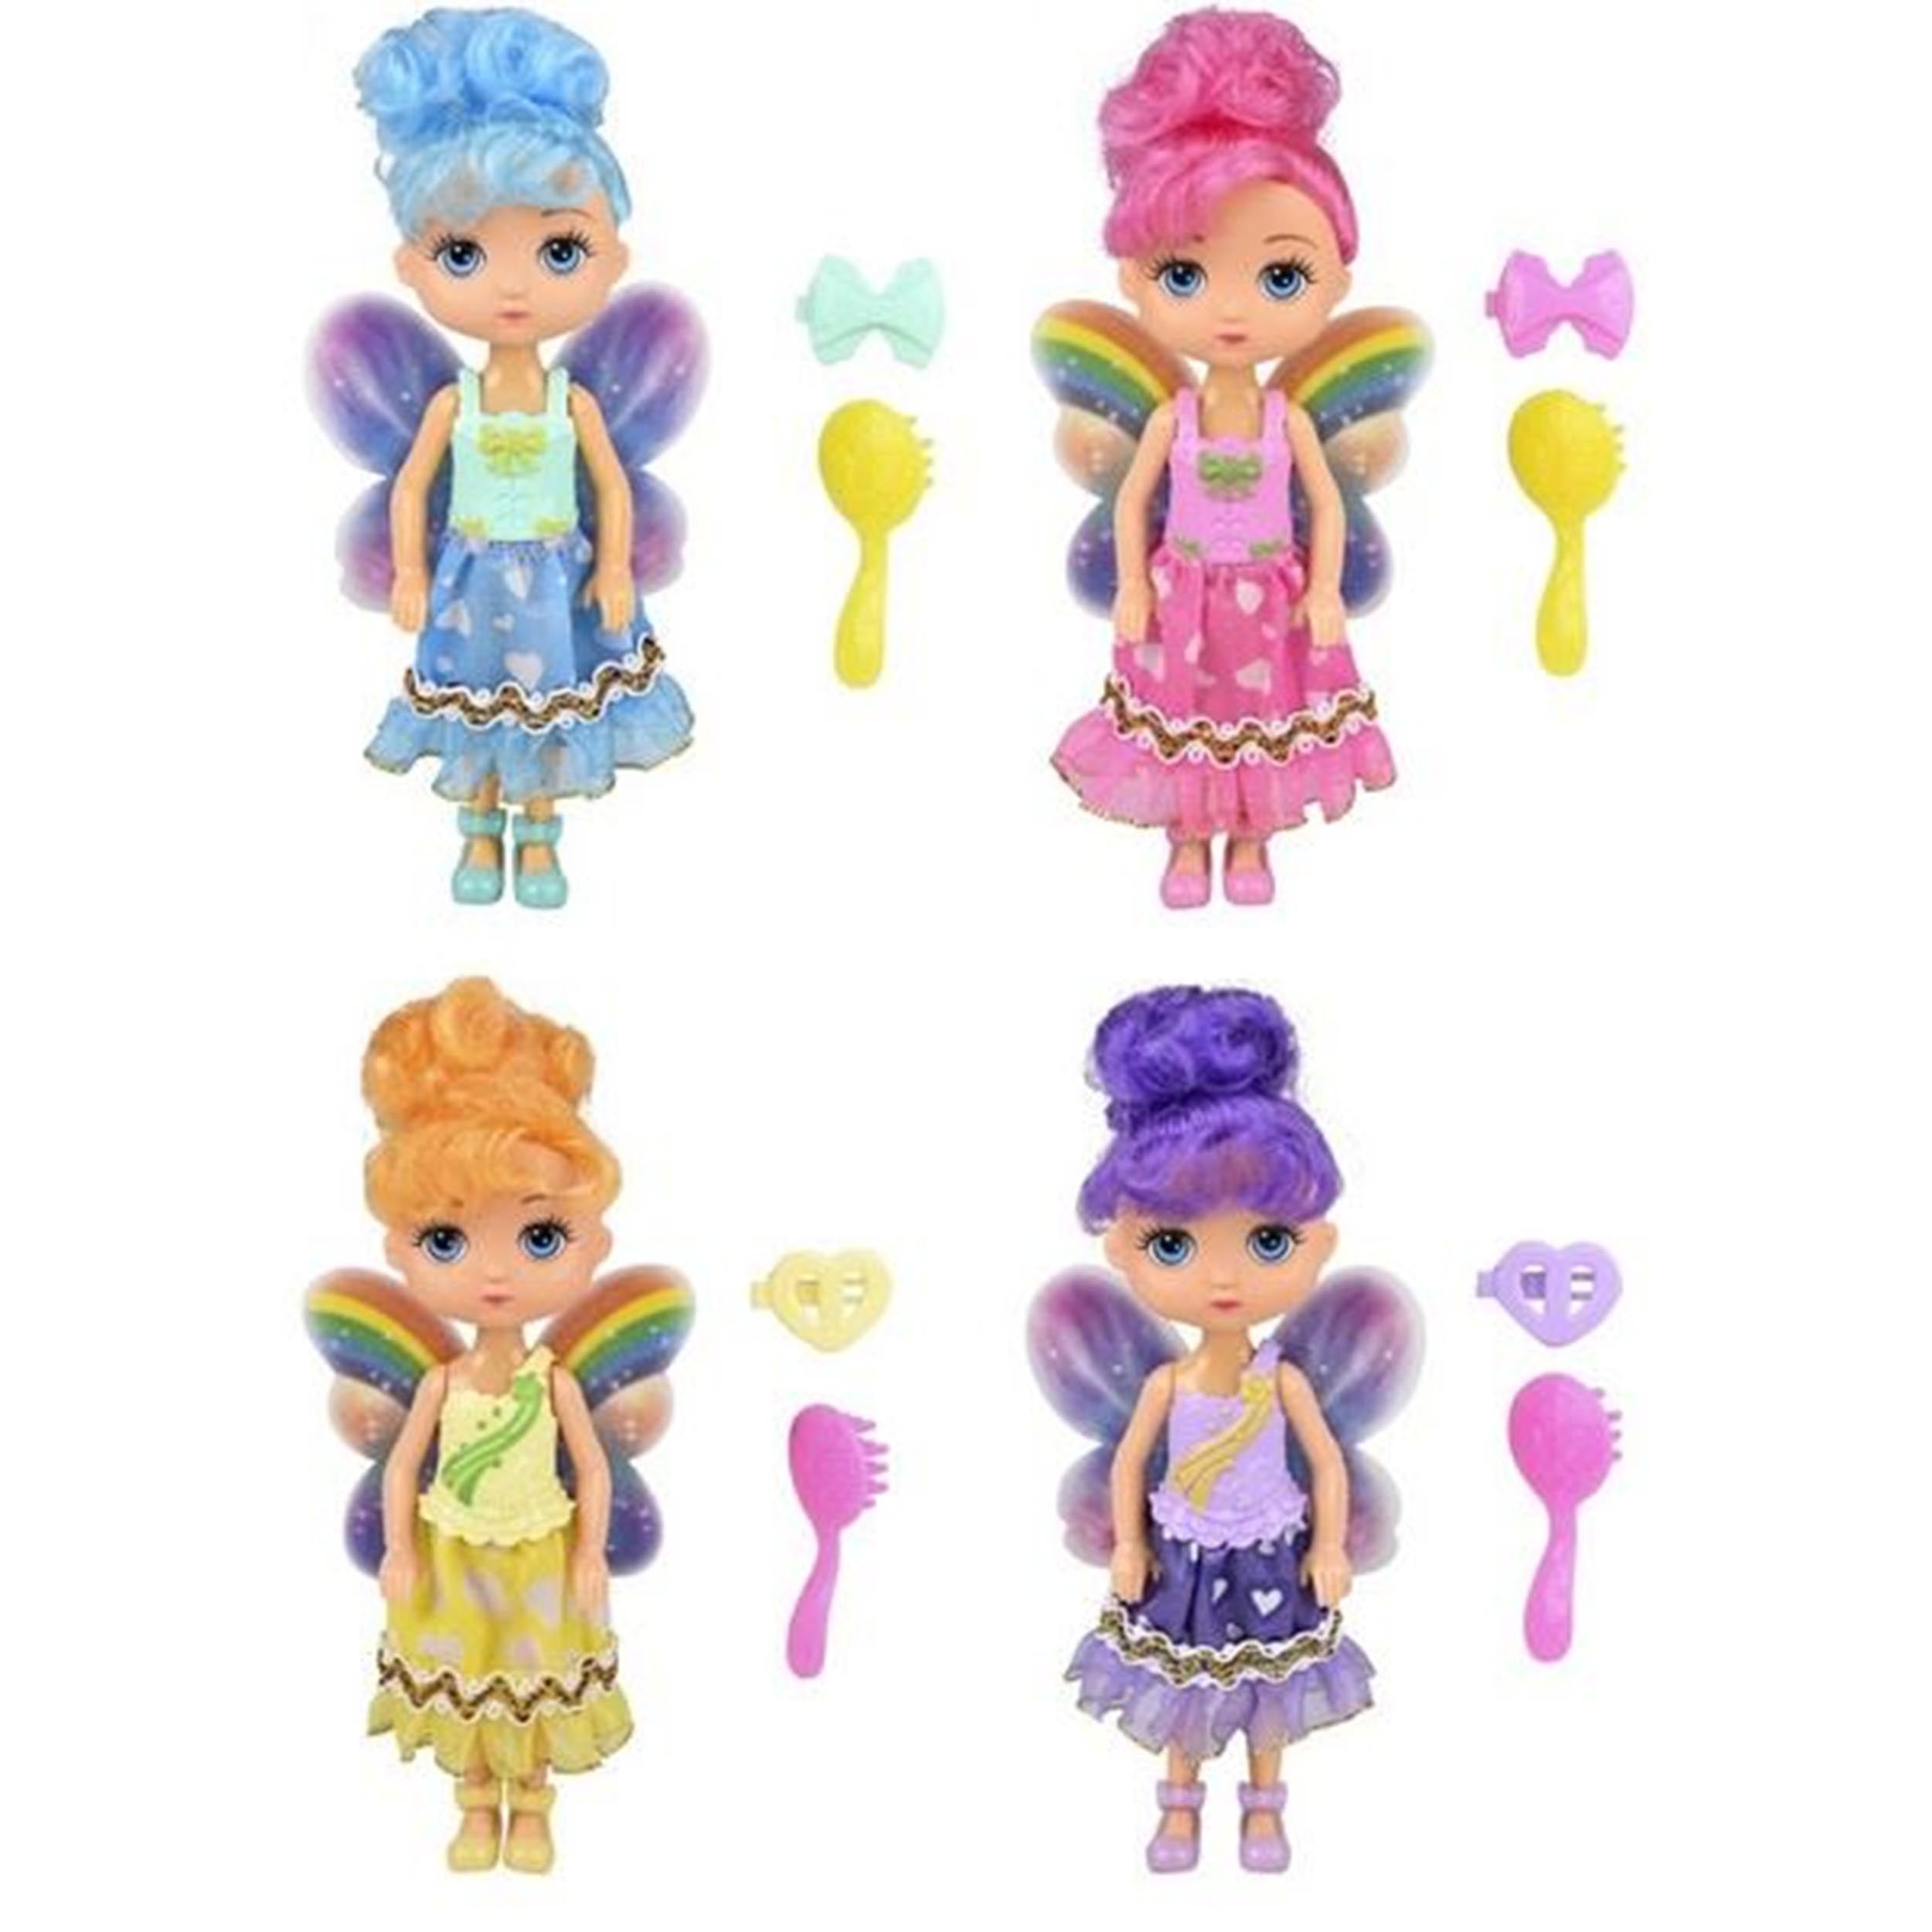 DIY Fairy Worry Dolls - Housewife Eclectic